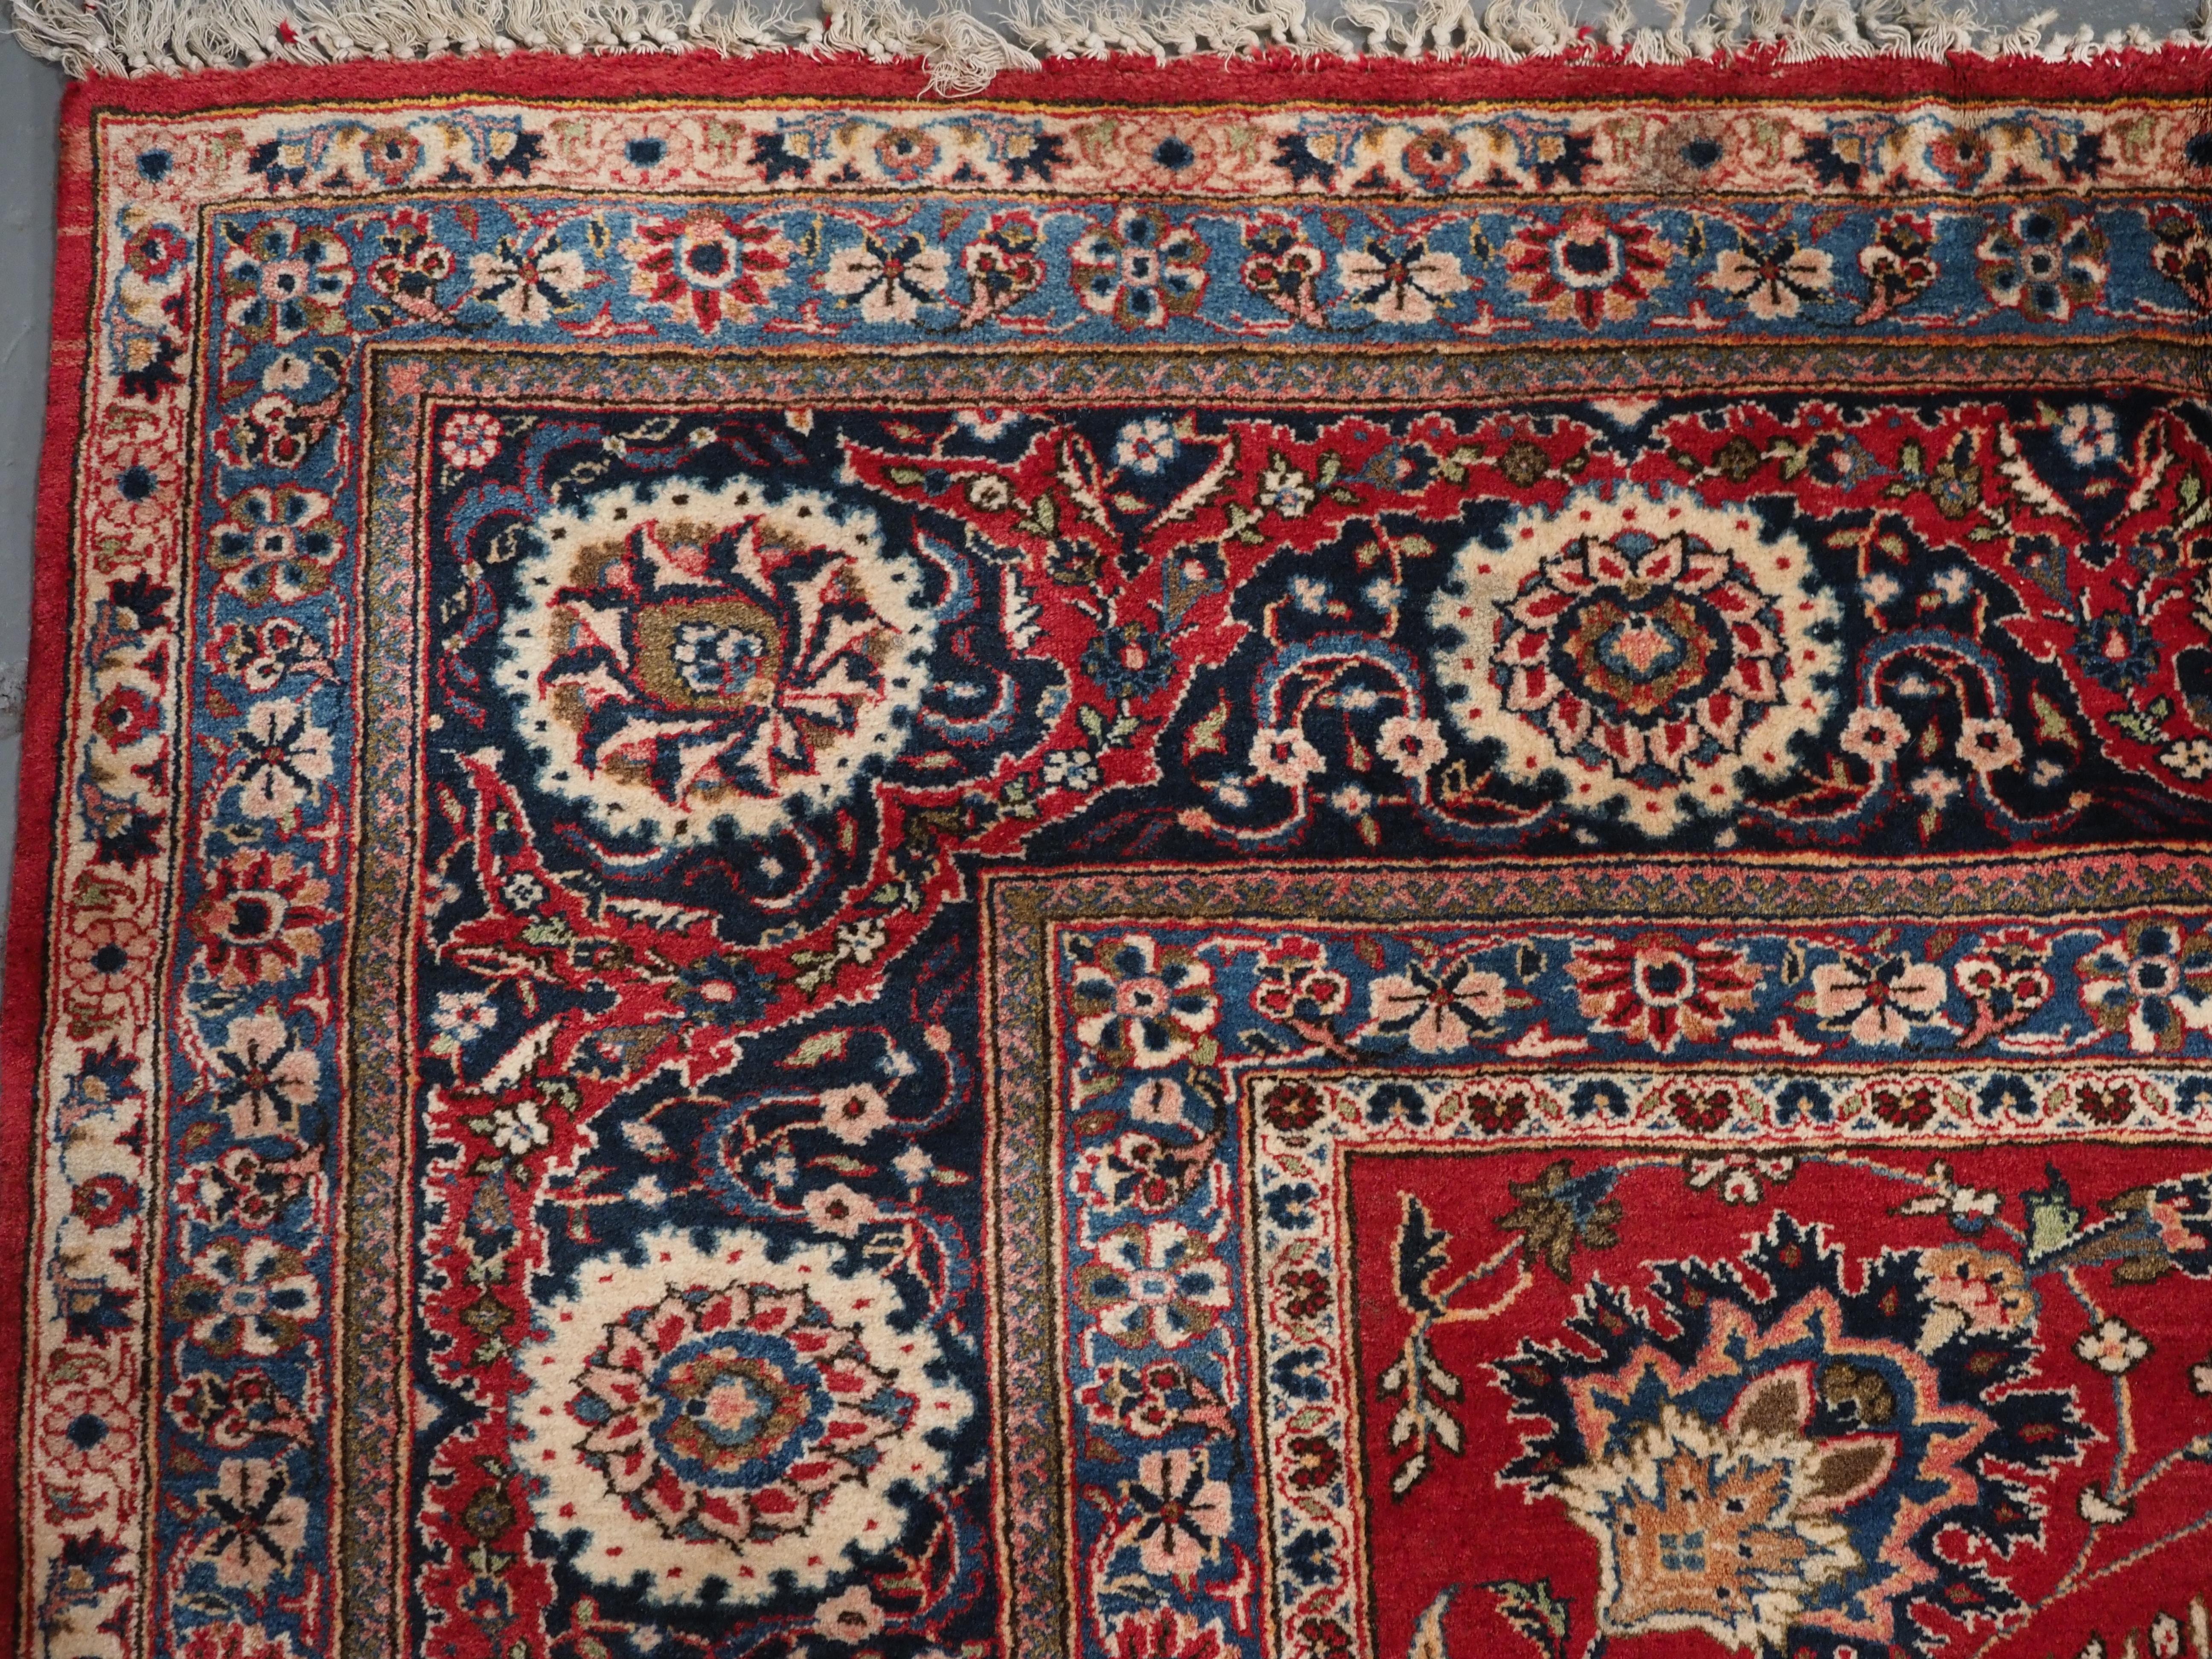 Size: 12ft 11in x 9ft 1in (393 x 278cm).

Old Kashan carpet of classic all over design and good colour, ideal for heavy duty furnishing use.

Circa 1930.

The carpet has a field of floral designs on a rich red ground.

The border is of a classic